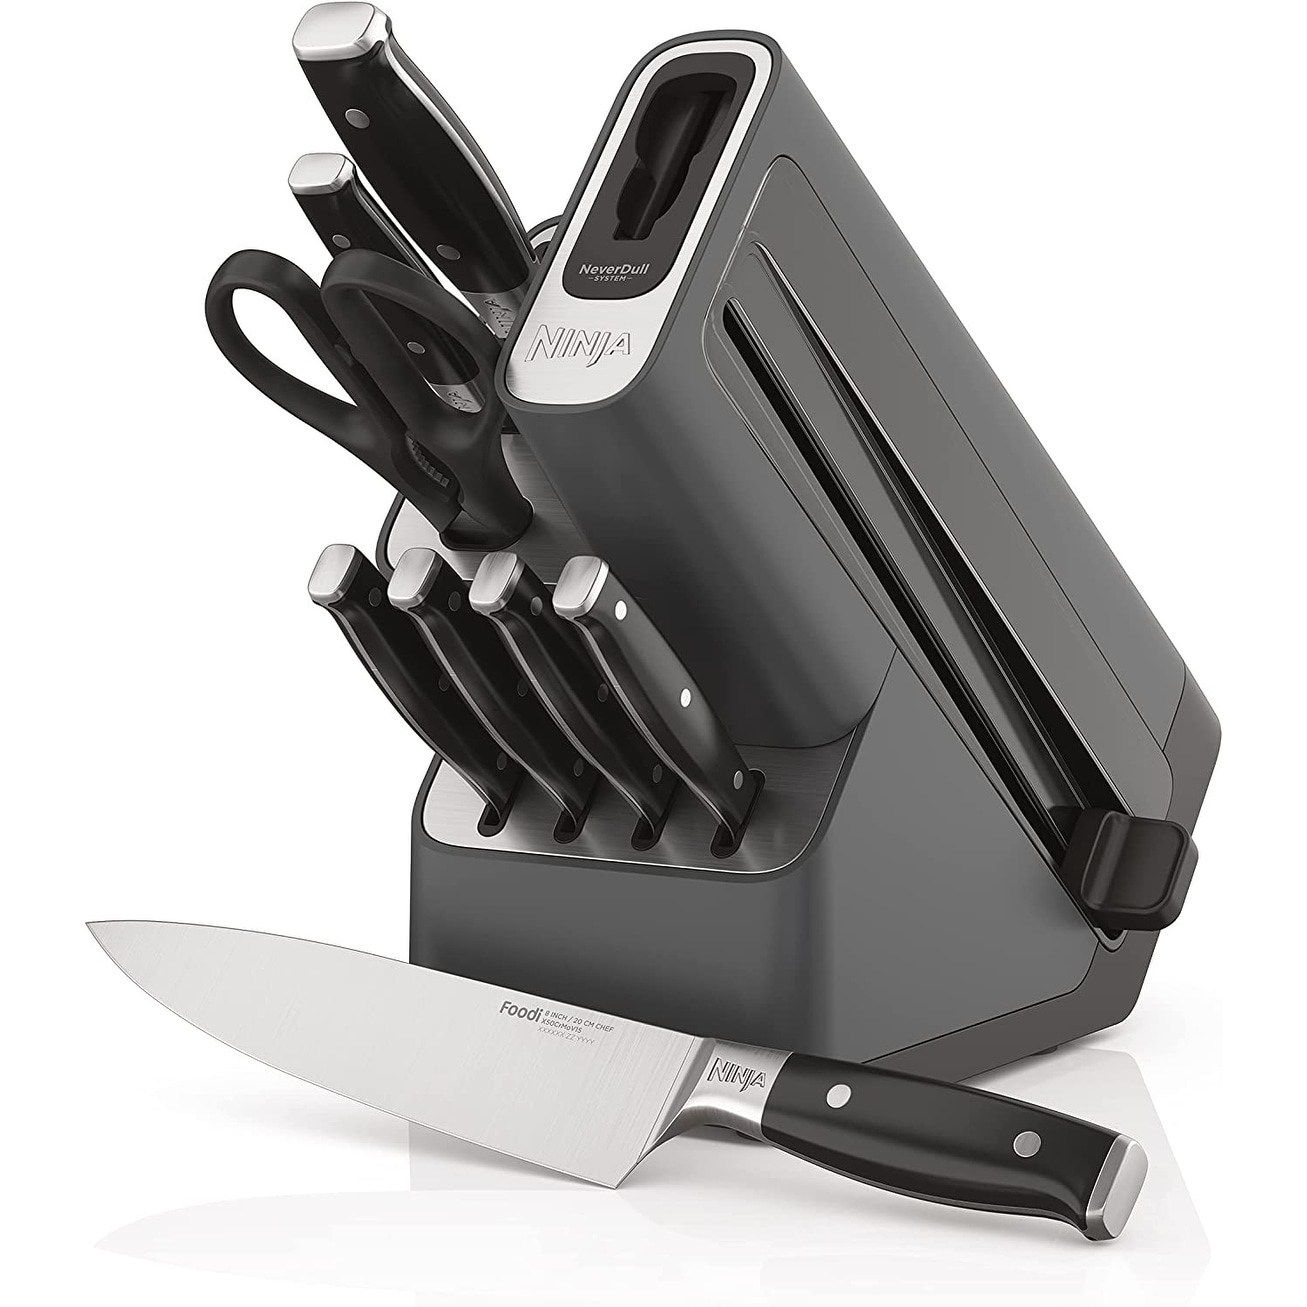 https://ak1.ostkcdn.com/images/products/is/images/direct/e11114e9f95f60d36eaca57eed6fc13ac28bf3c3/Ninja-K32009-Foodi-9-Piece-Knife-Block-Set-with-Built-in-Sharpener.jpg